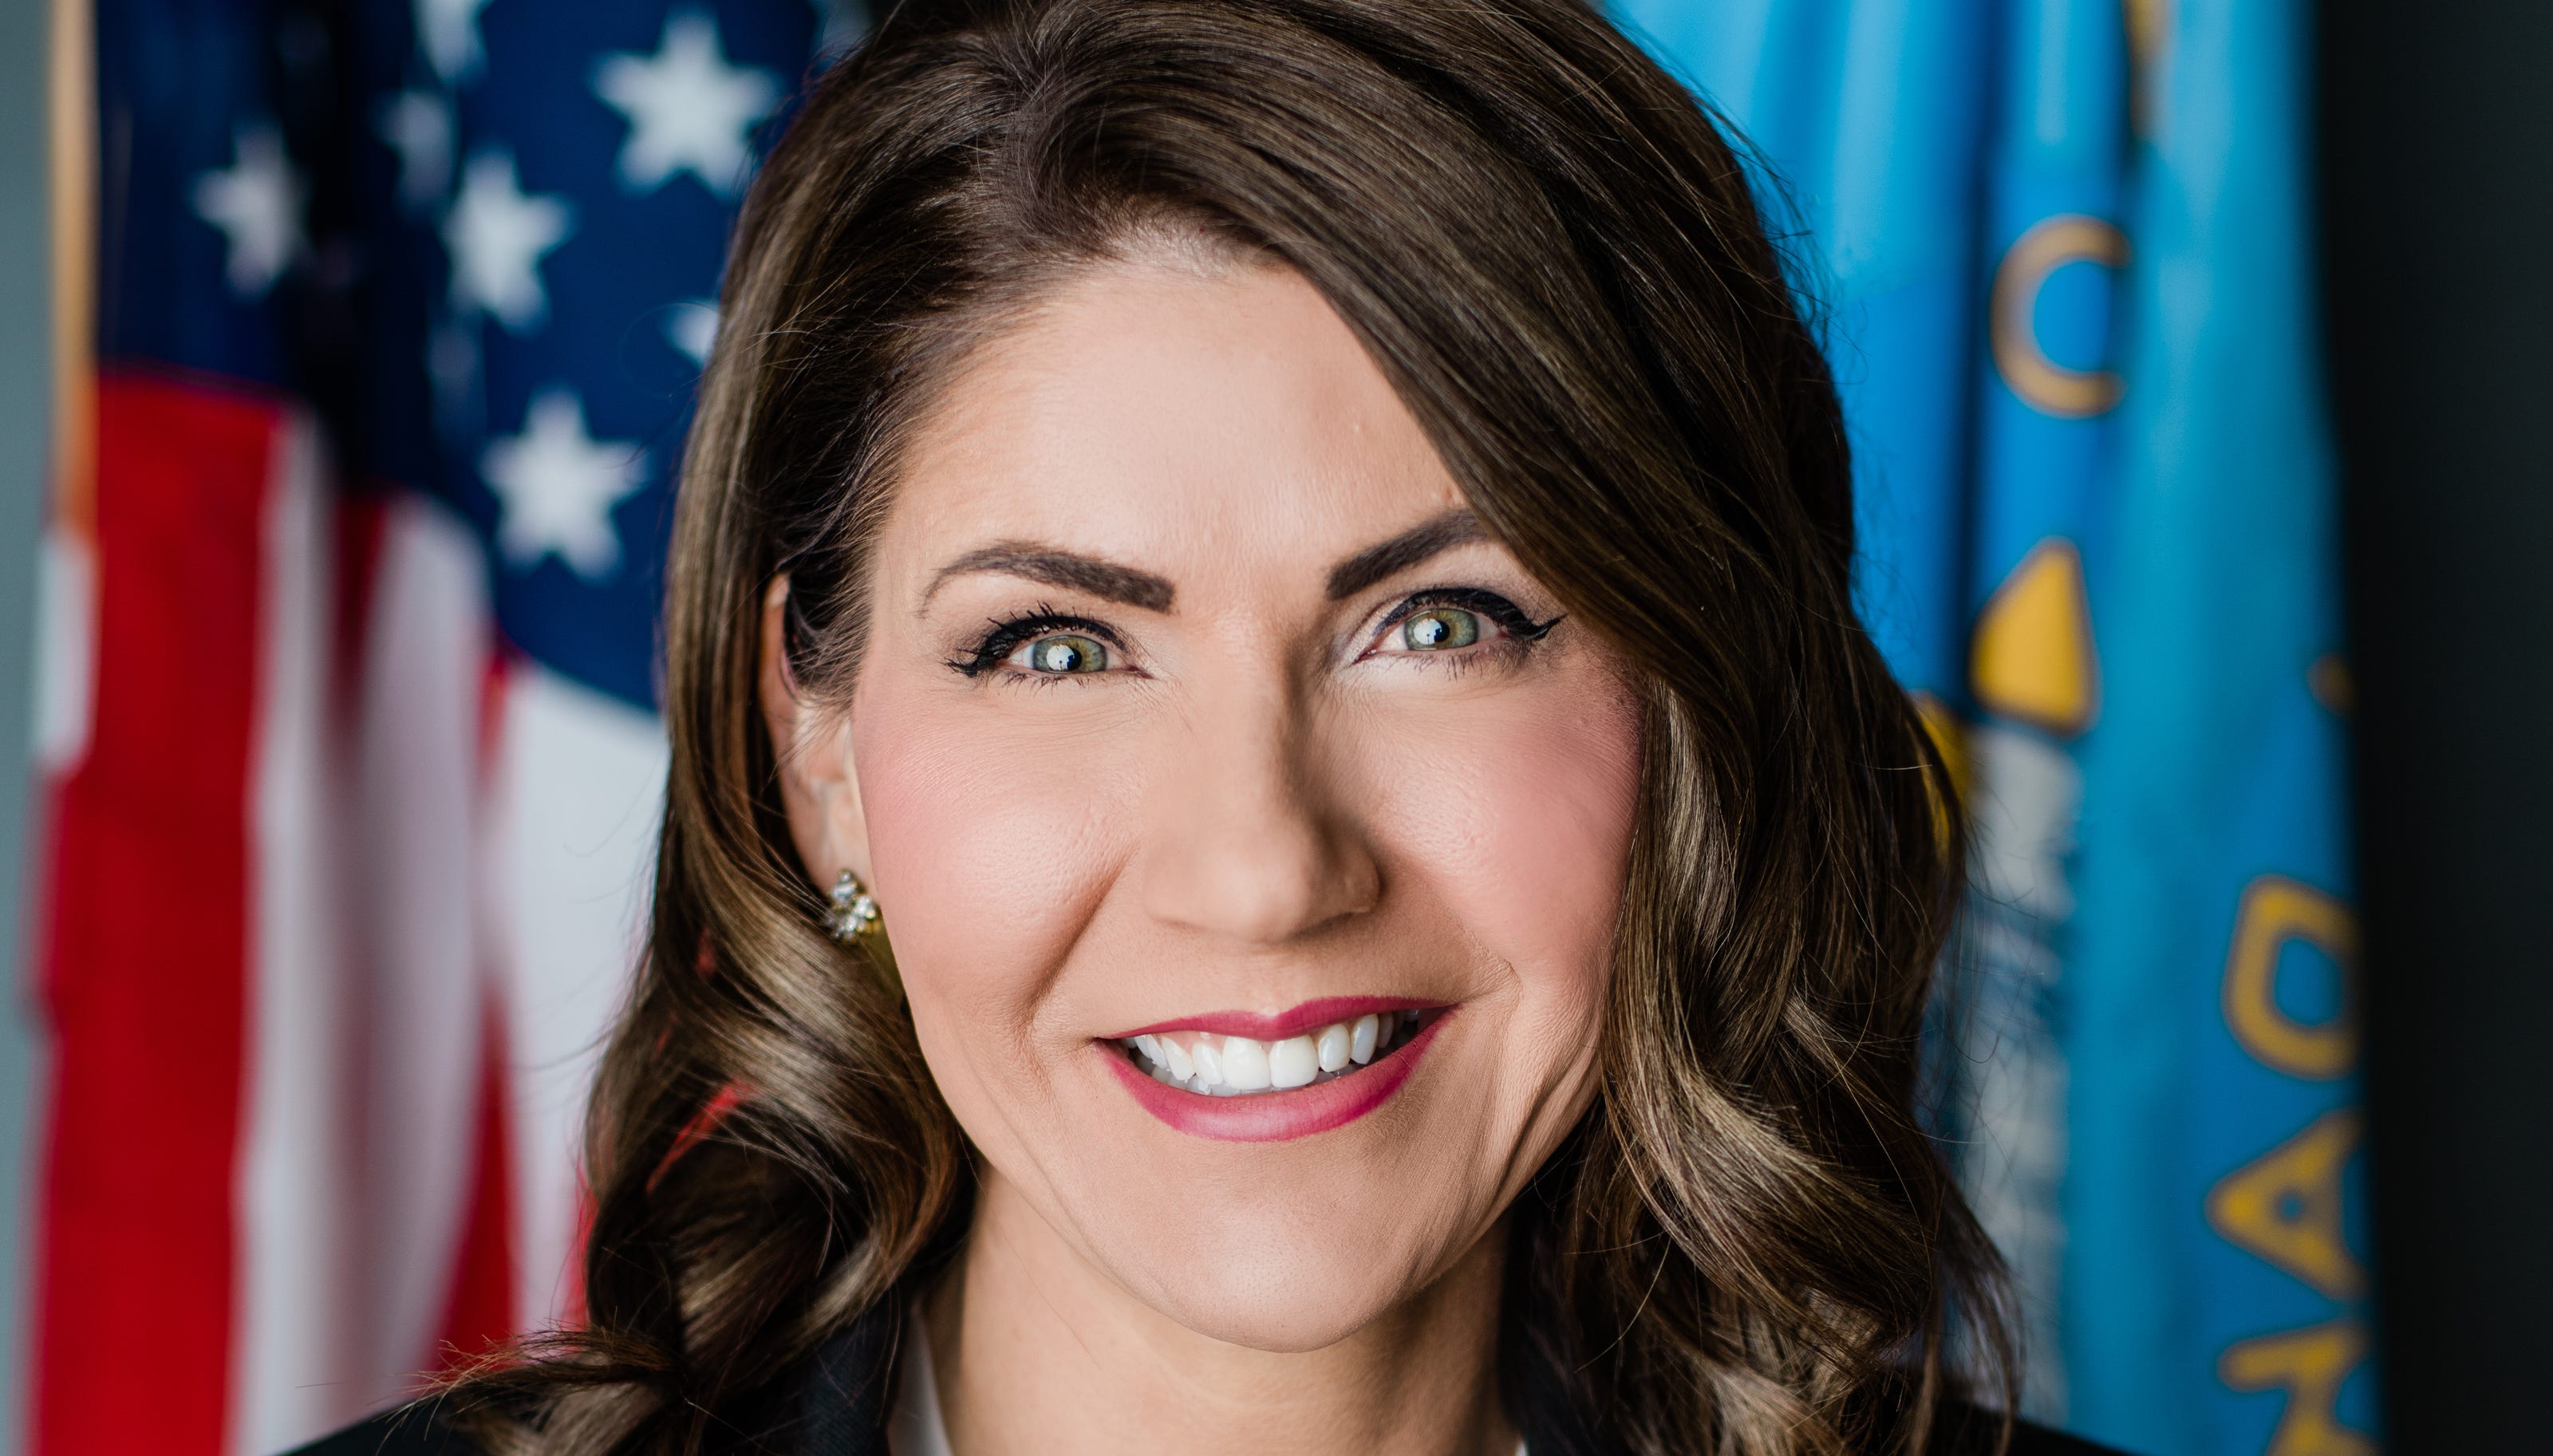 Kristi Noem visits Texas, as outofstate travel continues